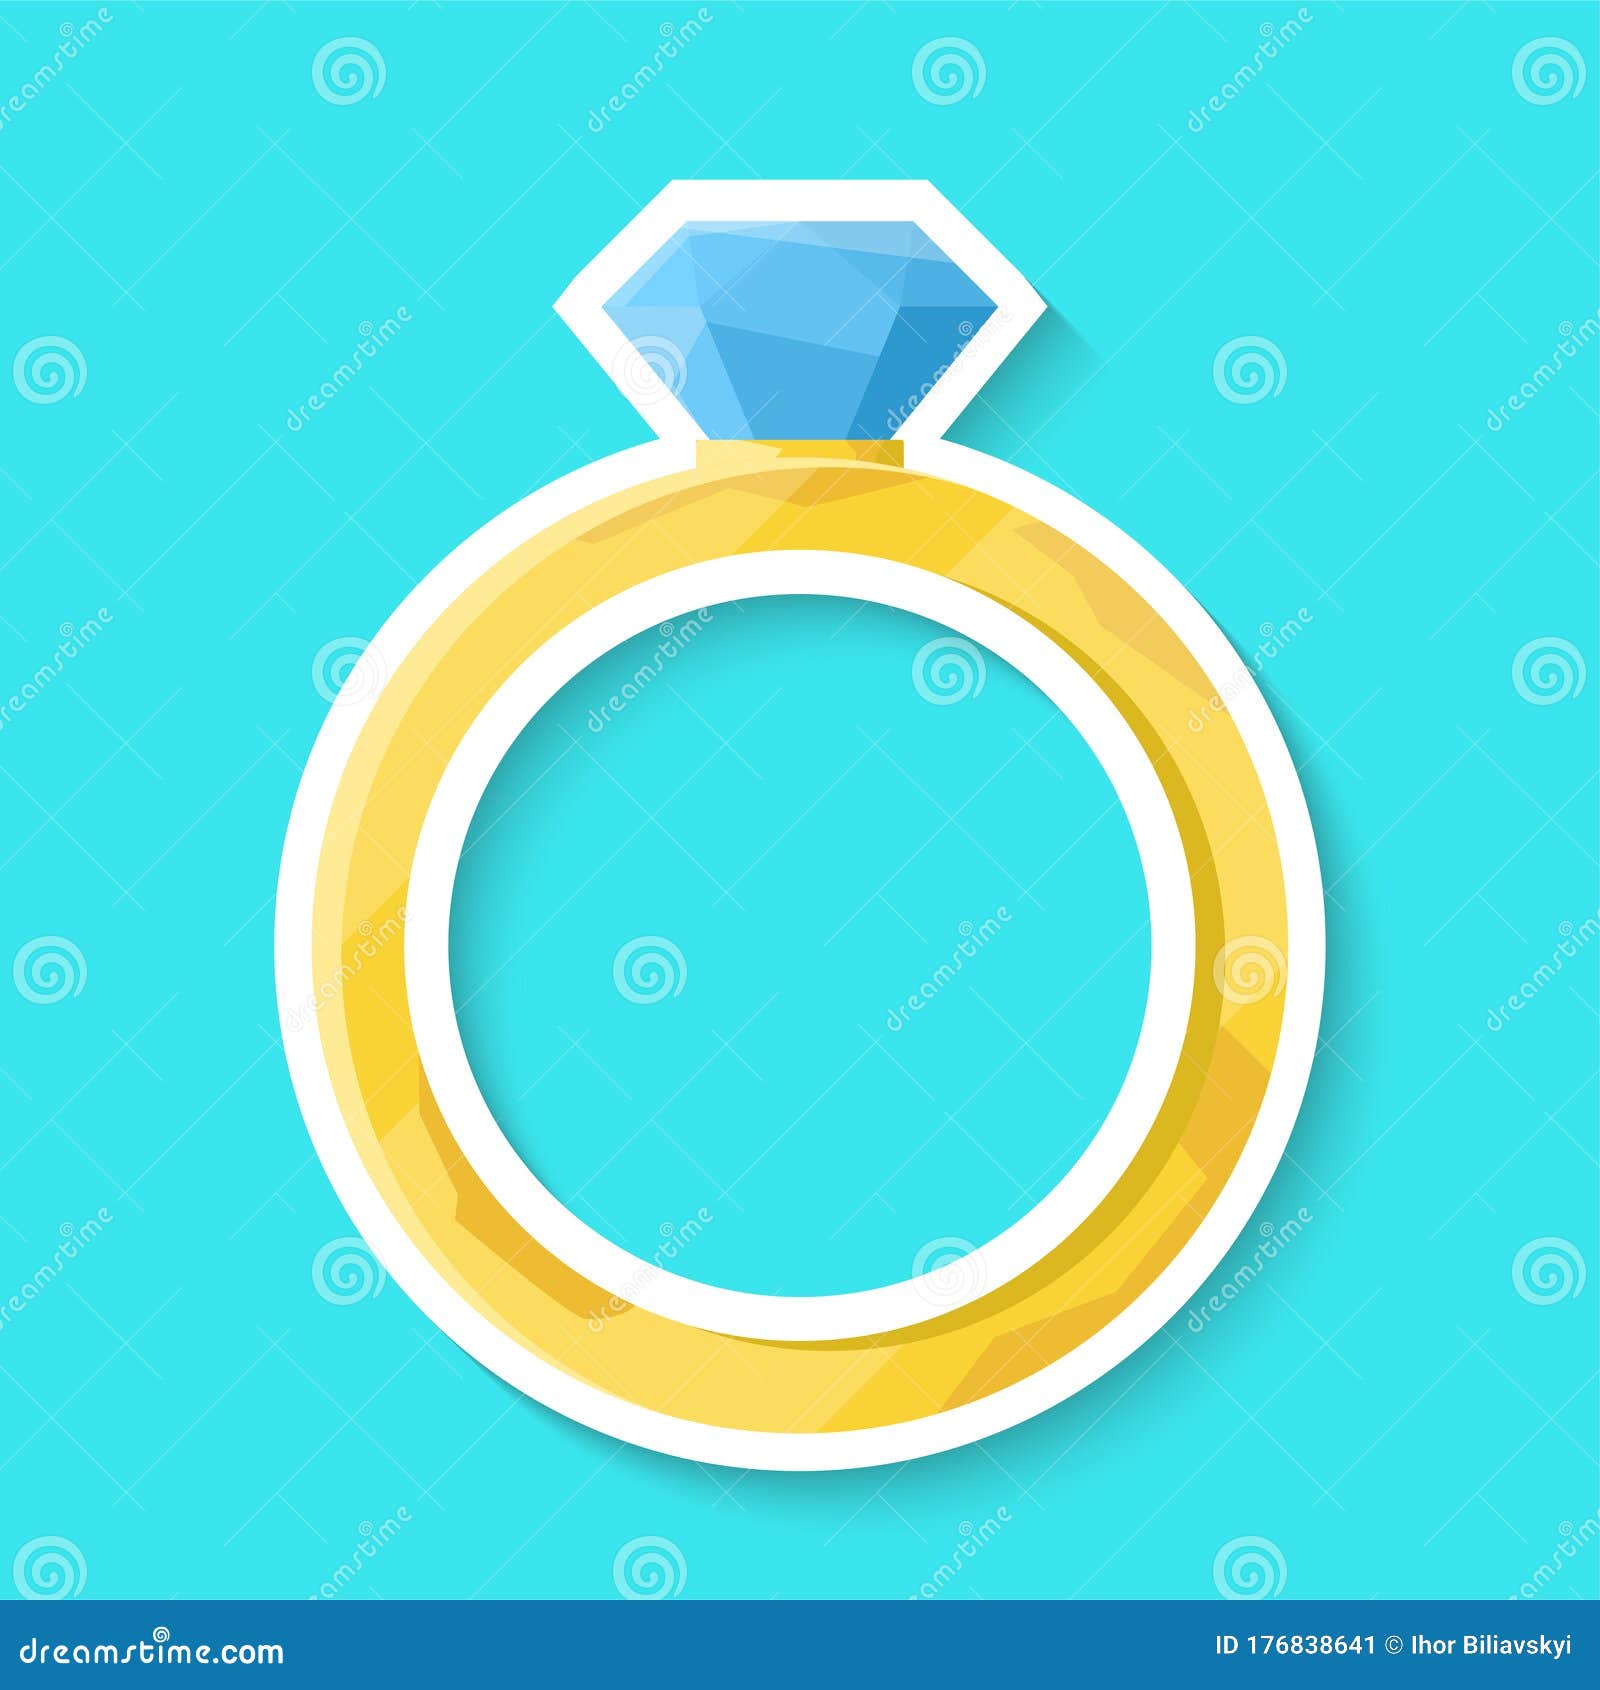 Wedding Ring Isolated On A Blue Background. Golden Ring